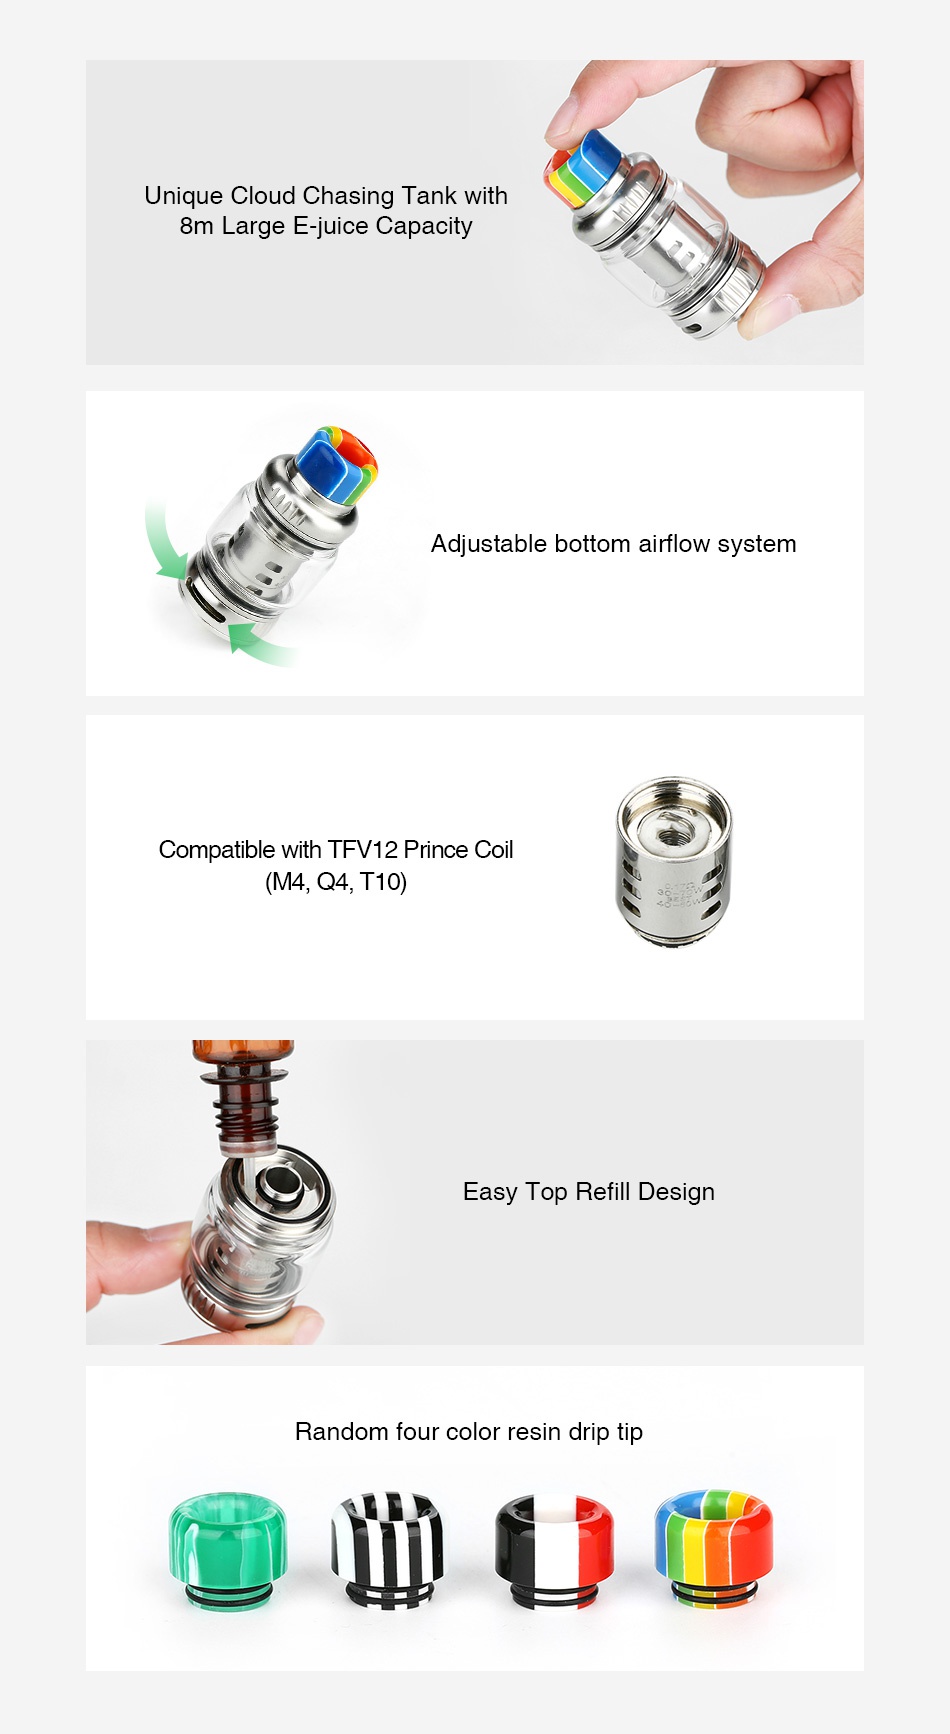 Vapesoon VS12 Super Cloud Tank 8ml Unique Cloud Chasing Tank with 8m Large E juice Capacity Adjustable bottom airflow system Compatible with TFV12 Prince Coil  M4 Q4 T10 Easy Top Refill Design Random four color resin drip tip